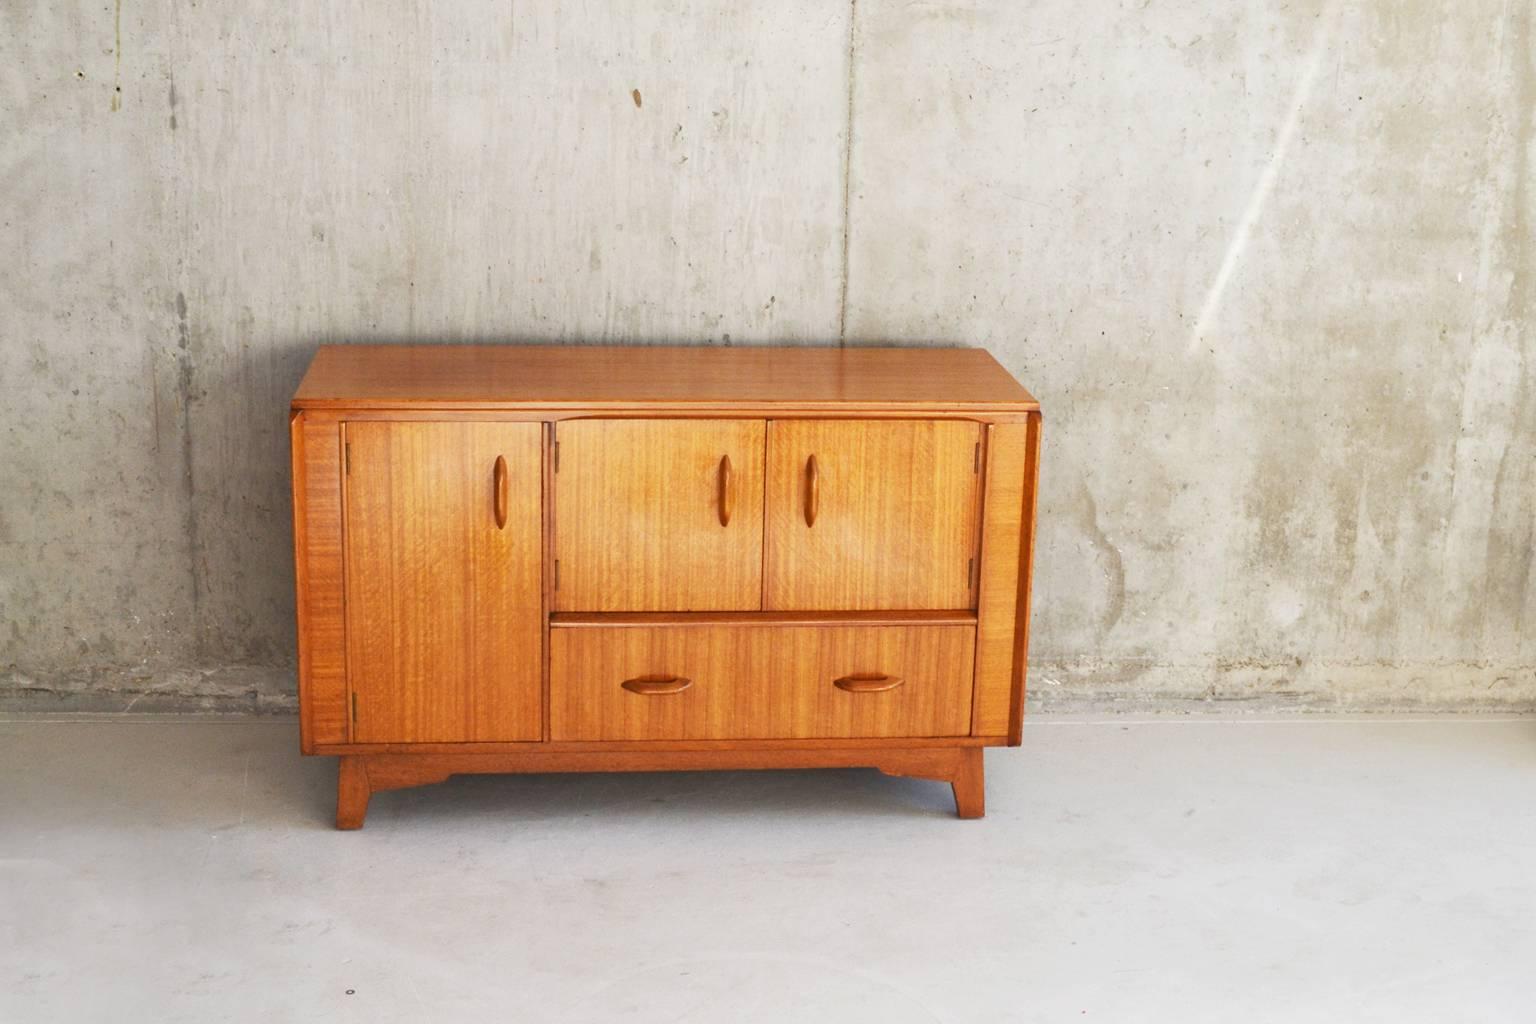 G Plan furniture with the gold ‘E Gomme Ltd’ stamp was produced between 1955-1965. This is a very nice example. Although the size and shape of a chest of drawers, it is a sideboard. A neat detail is a detachable tray that sits inside the cupboard